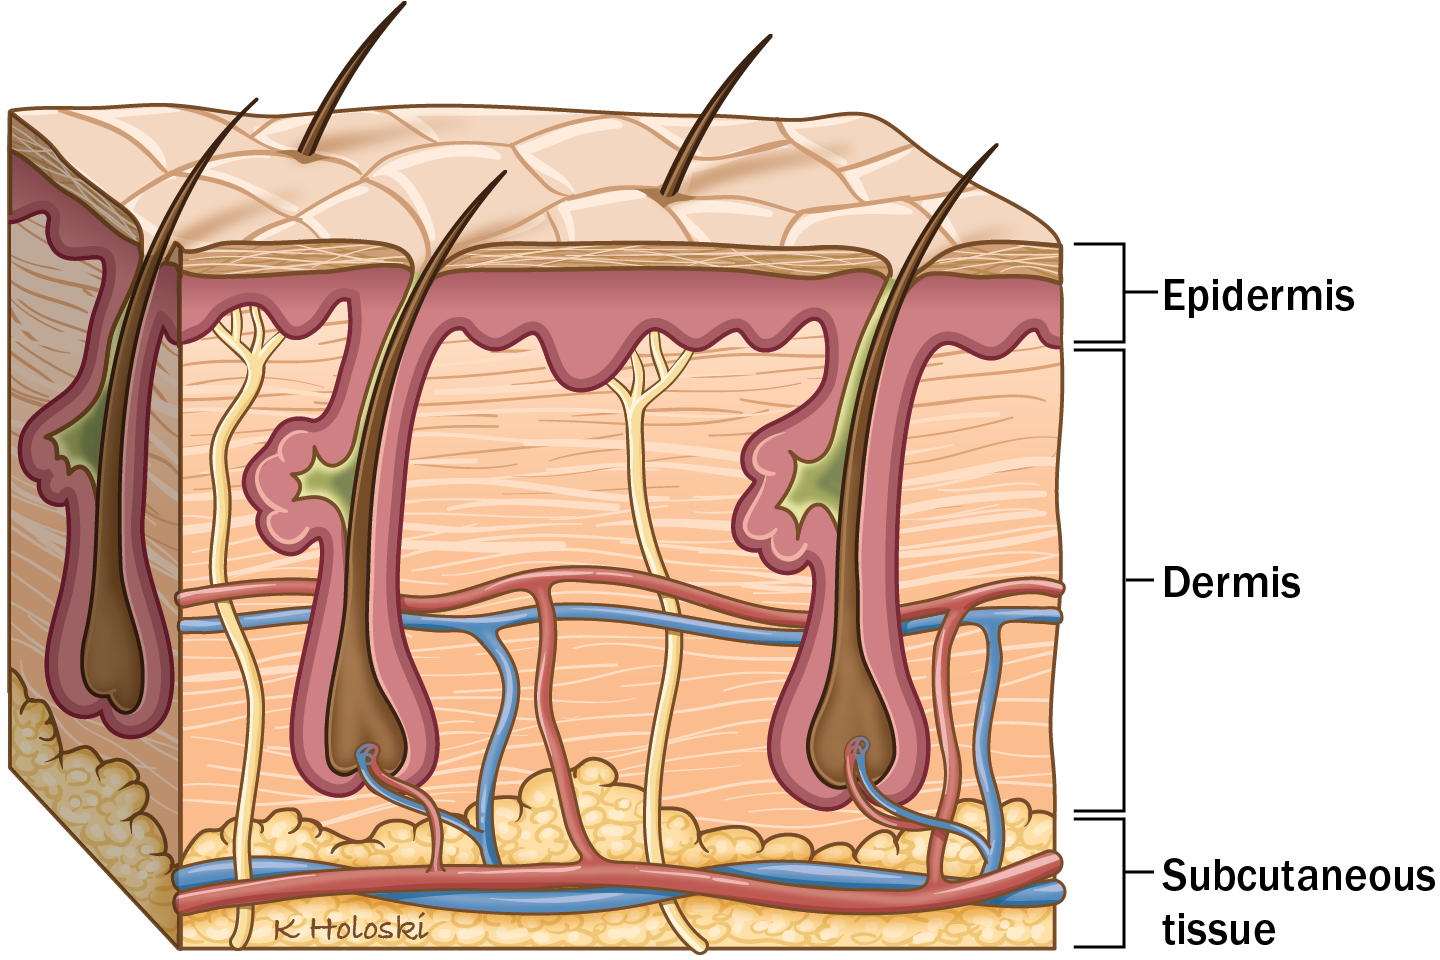 The Different Layers of the Skin.